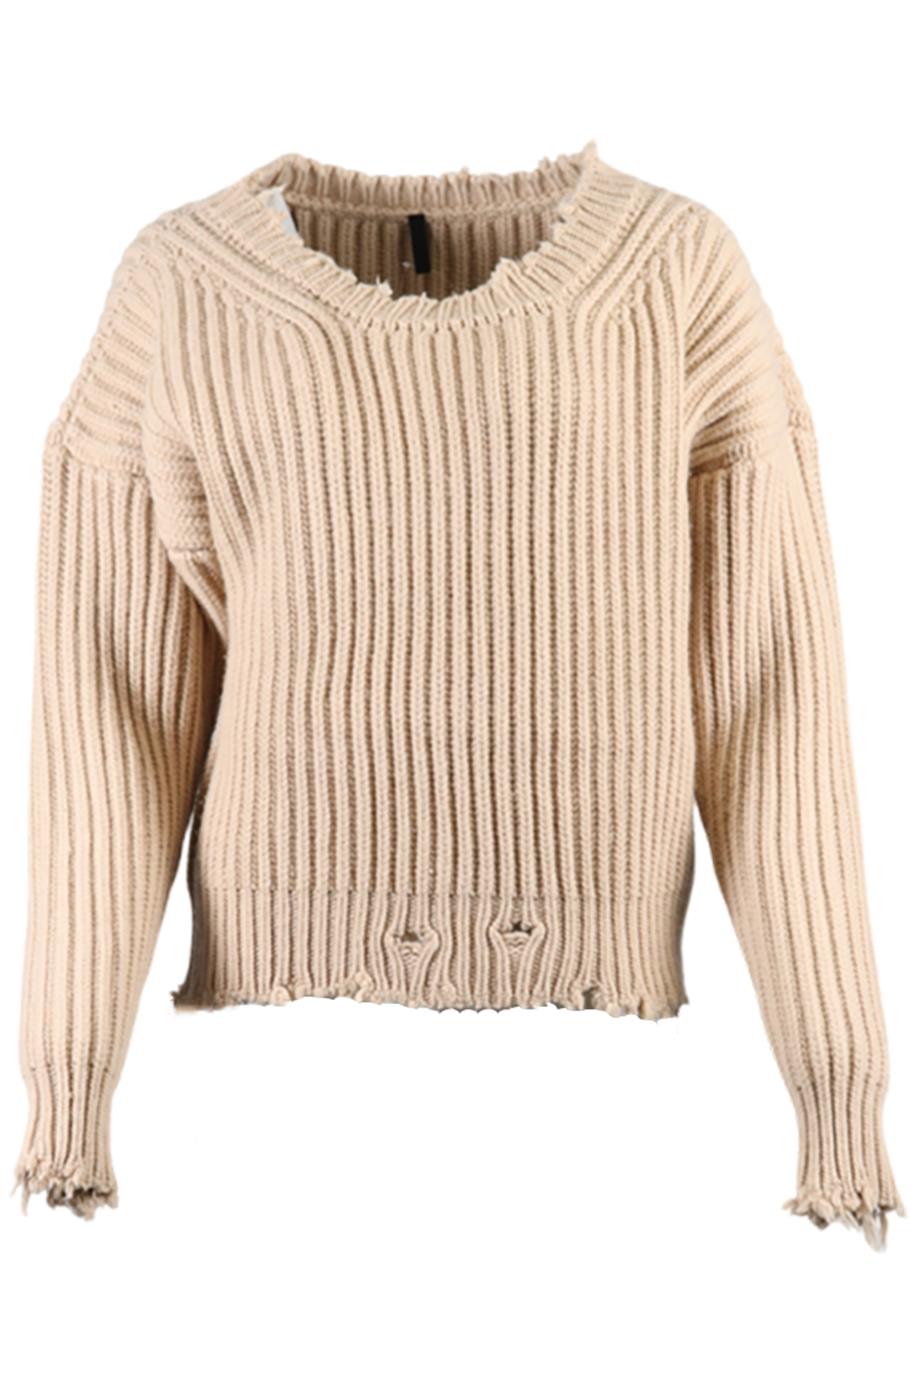 UNRAVEL PROJECT WOOL AND CASHMERE BLEND SWEATER XSMALL